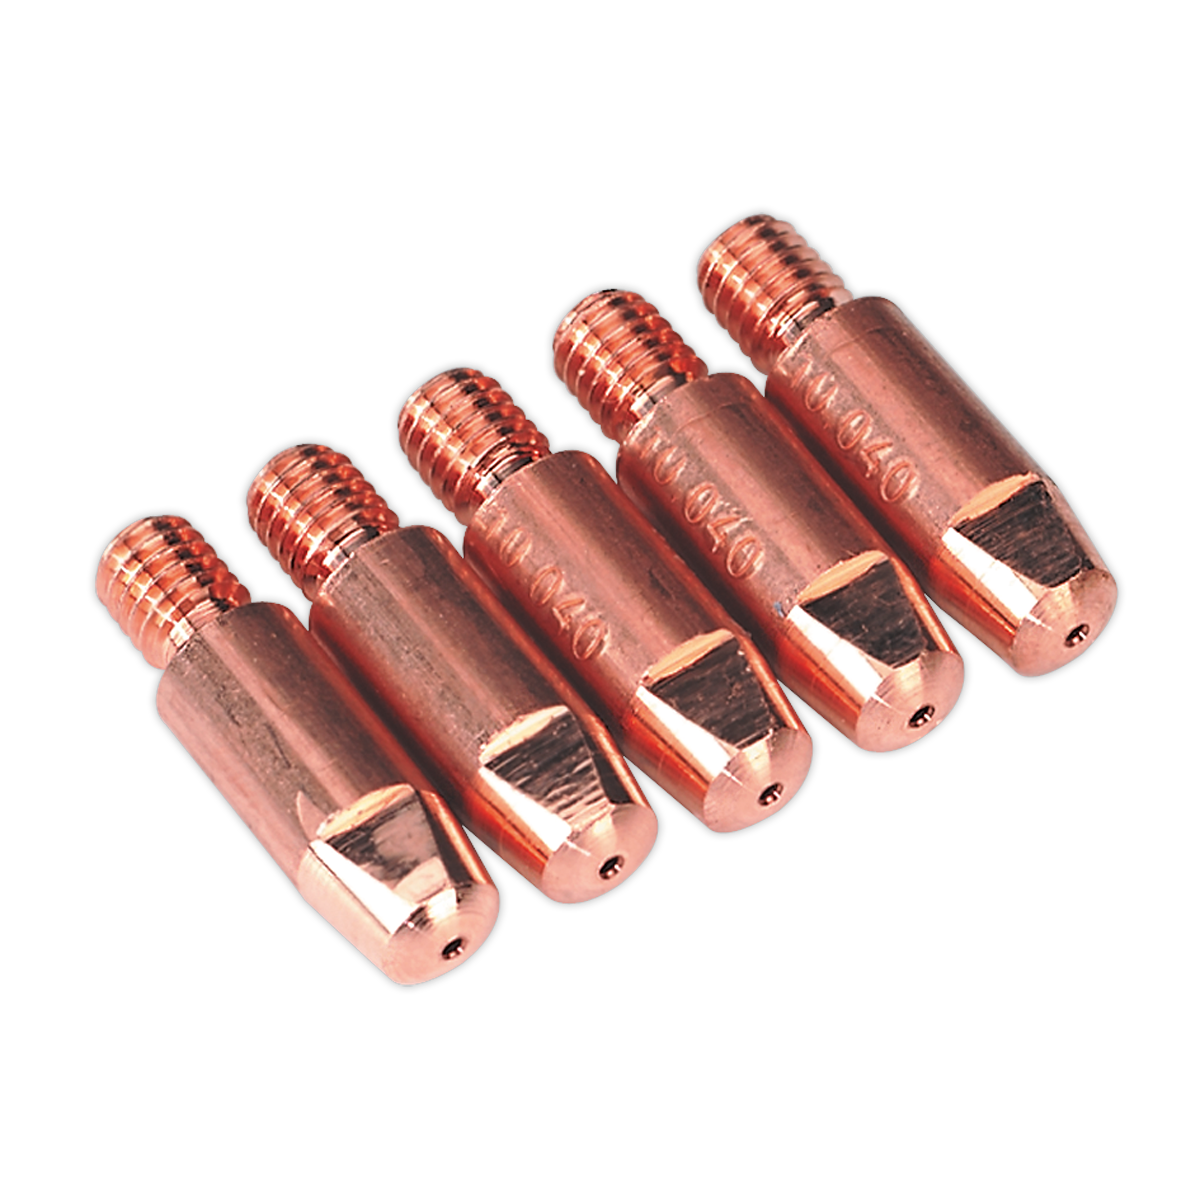 Contact Tip 0.6mm MB25/36 Pack of 5